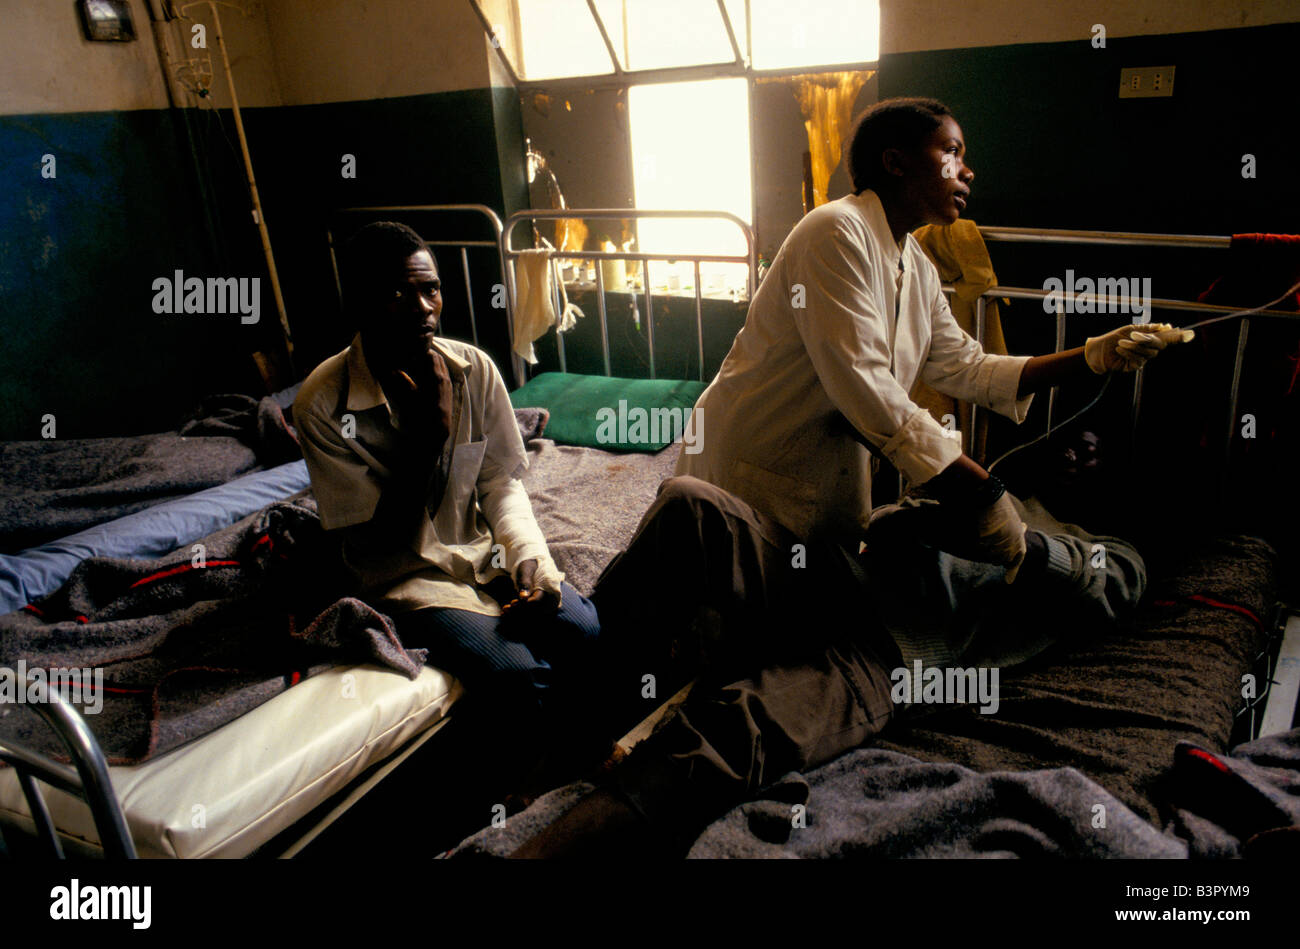 THE ONLY BURUNDI NURSE LEFT IN THE HOSPITAL TENDS THE WOUNDED. ALL THE OTHER MEDICAL STAFF APART FROM ONE DOCTOR HAVE FLED Stock Photo